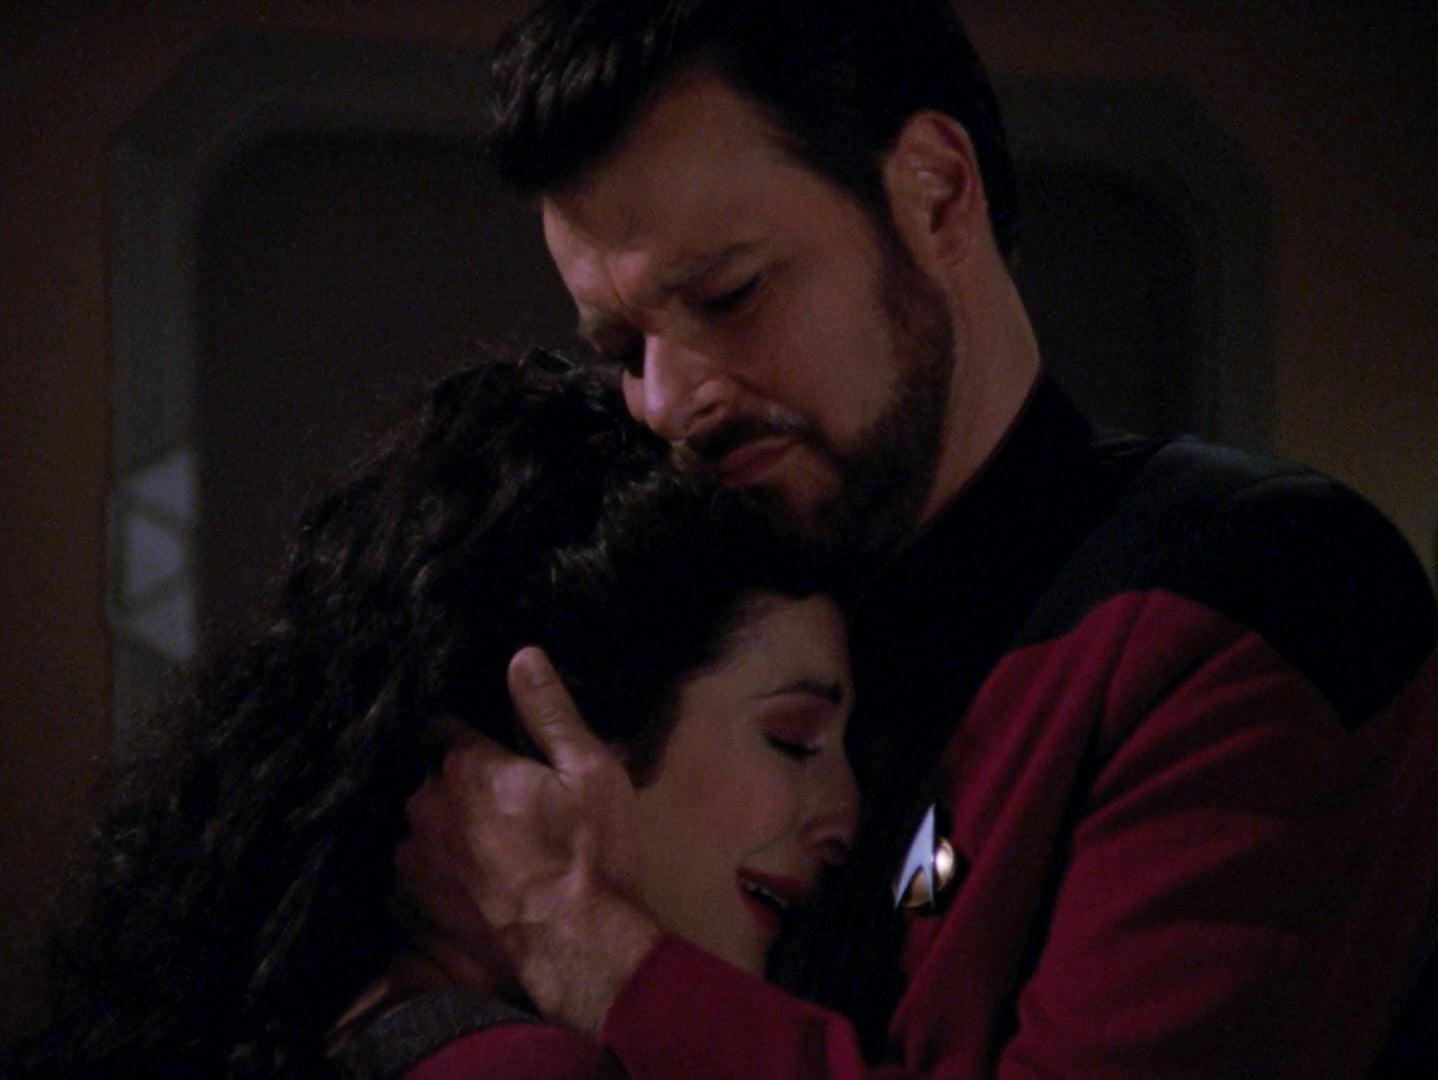 Riker embraces and comforts Deanna Troi as she grieves the loss of her abilities